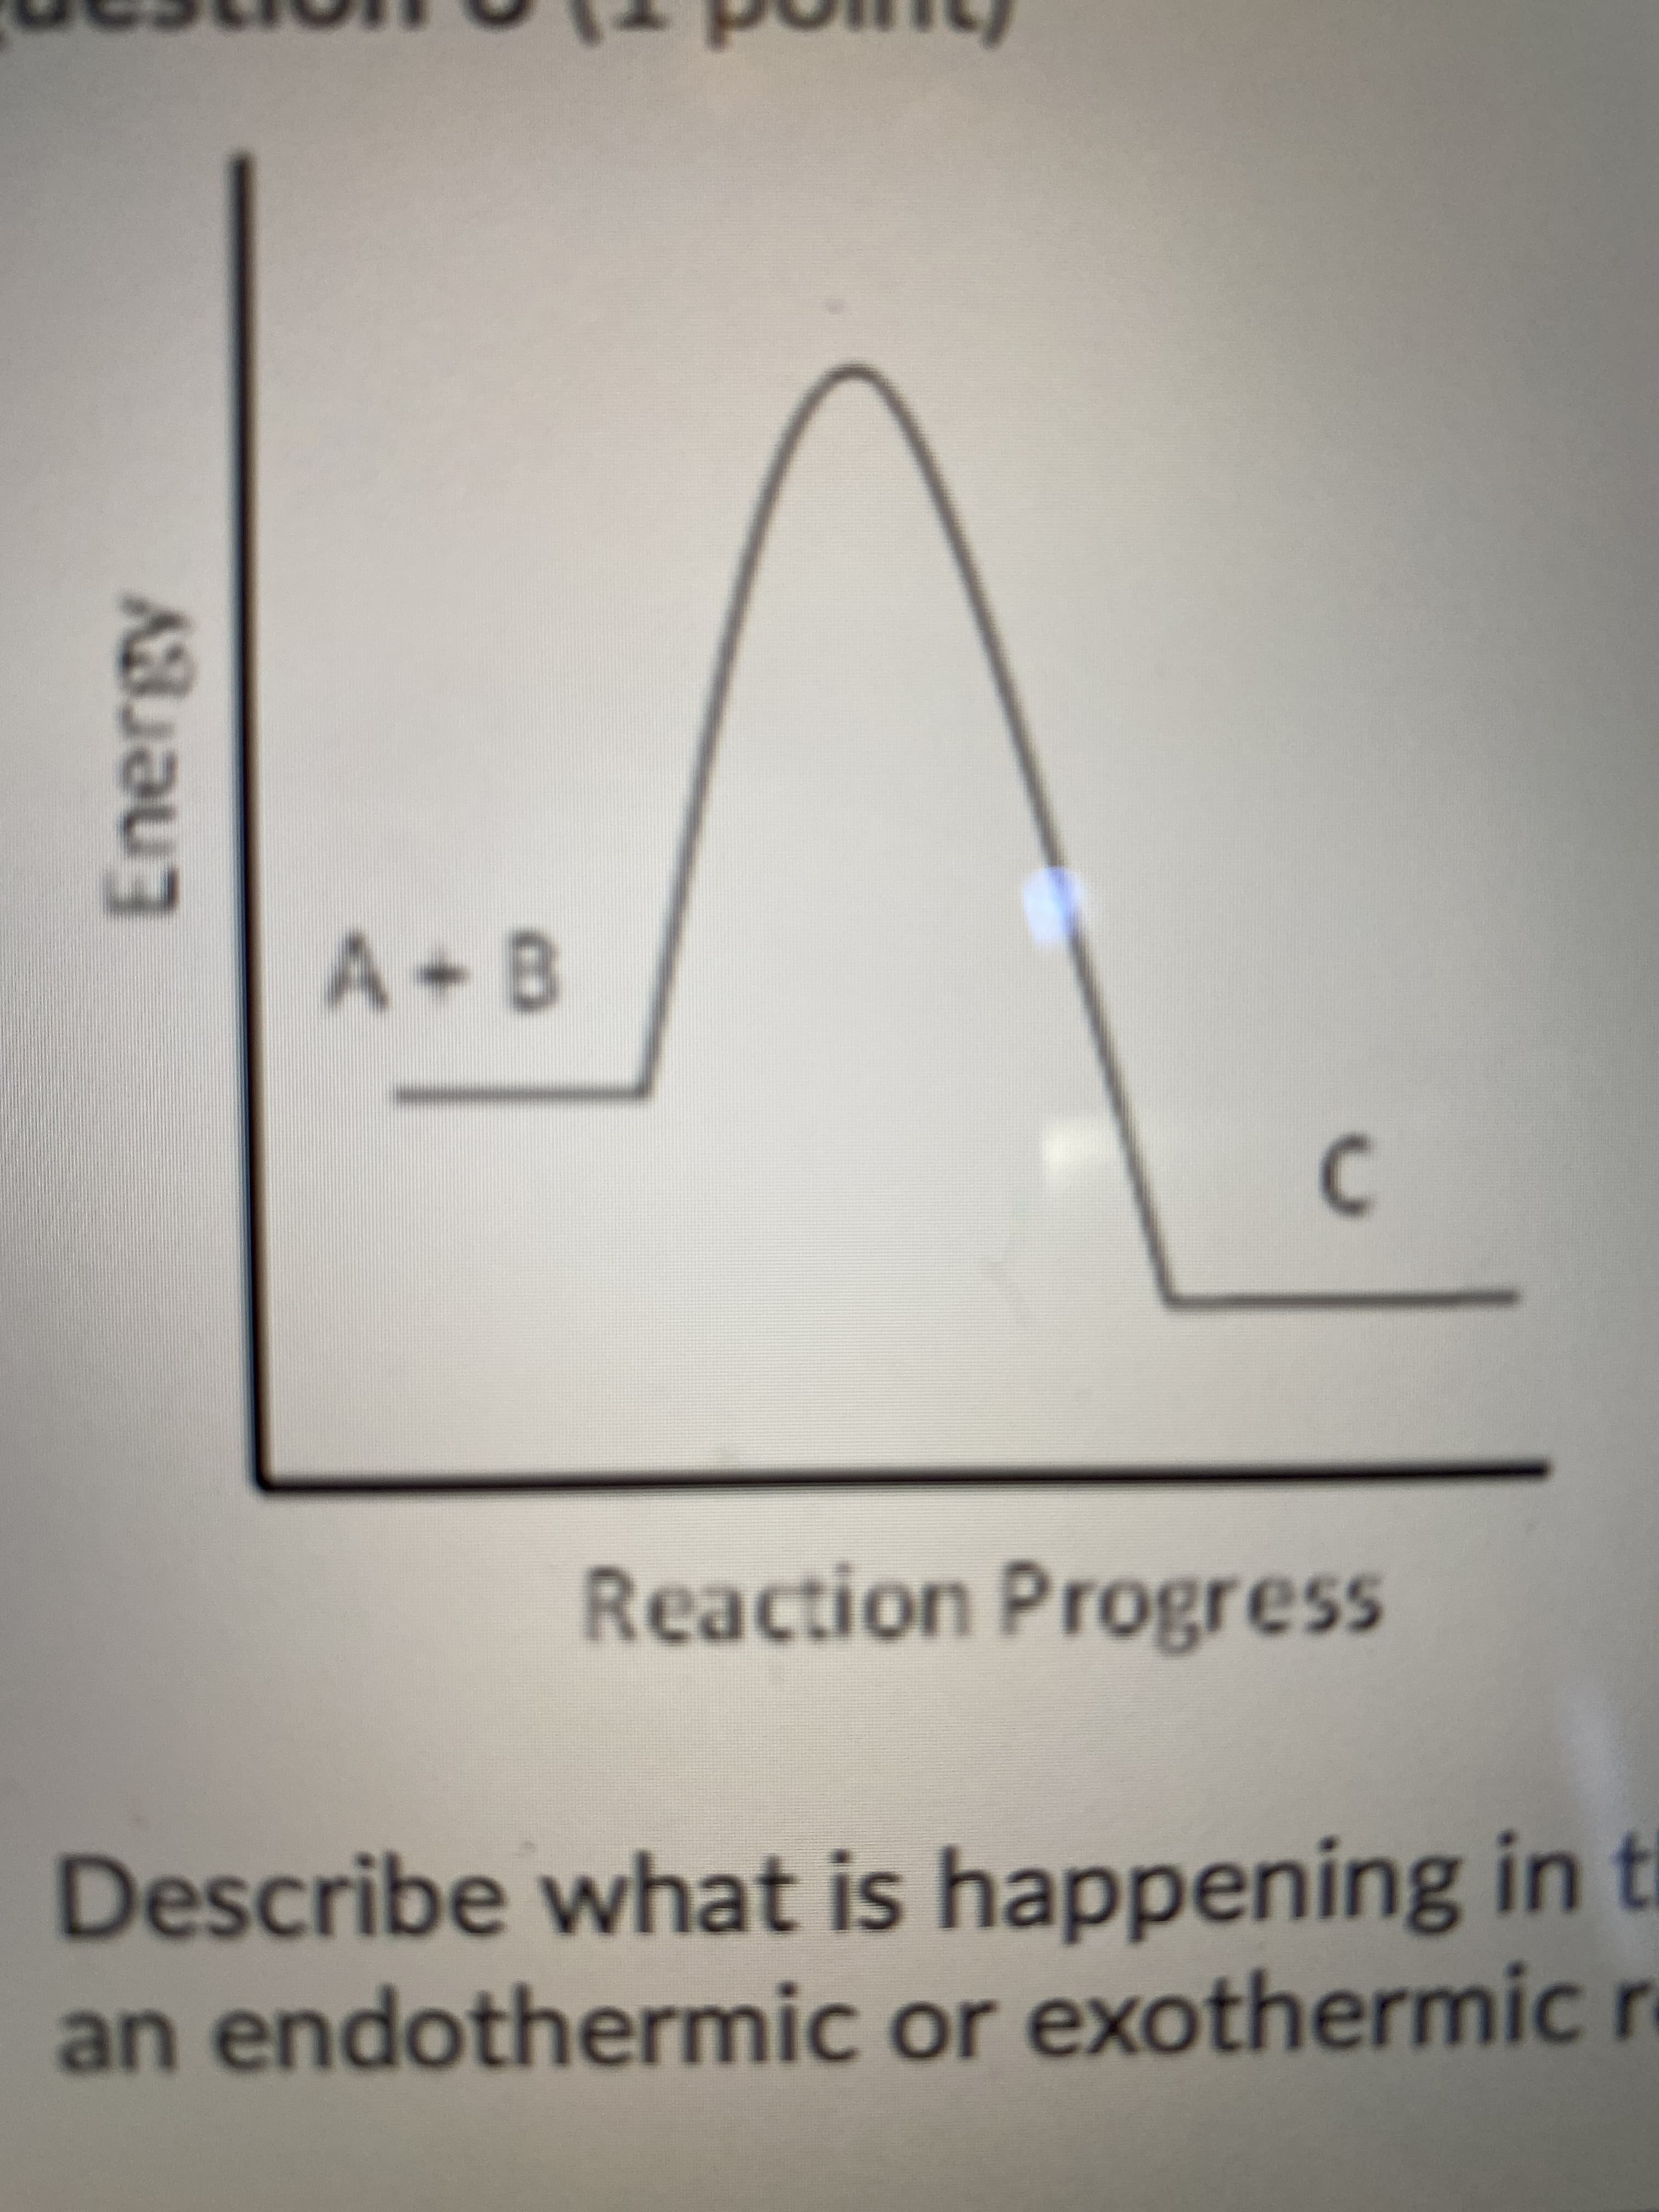 Energy
A+B
Reaction Progress
Describe what is happening in ti
an endothermic or exothermic re
